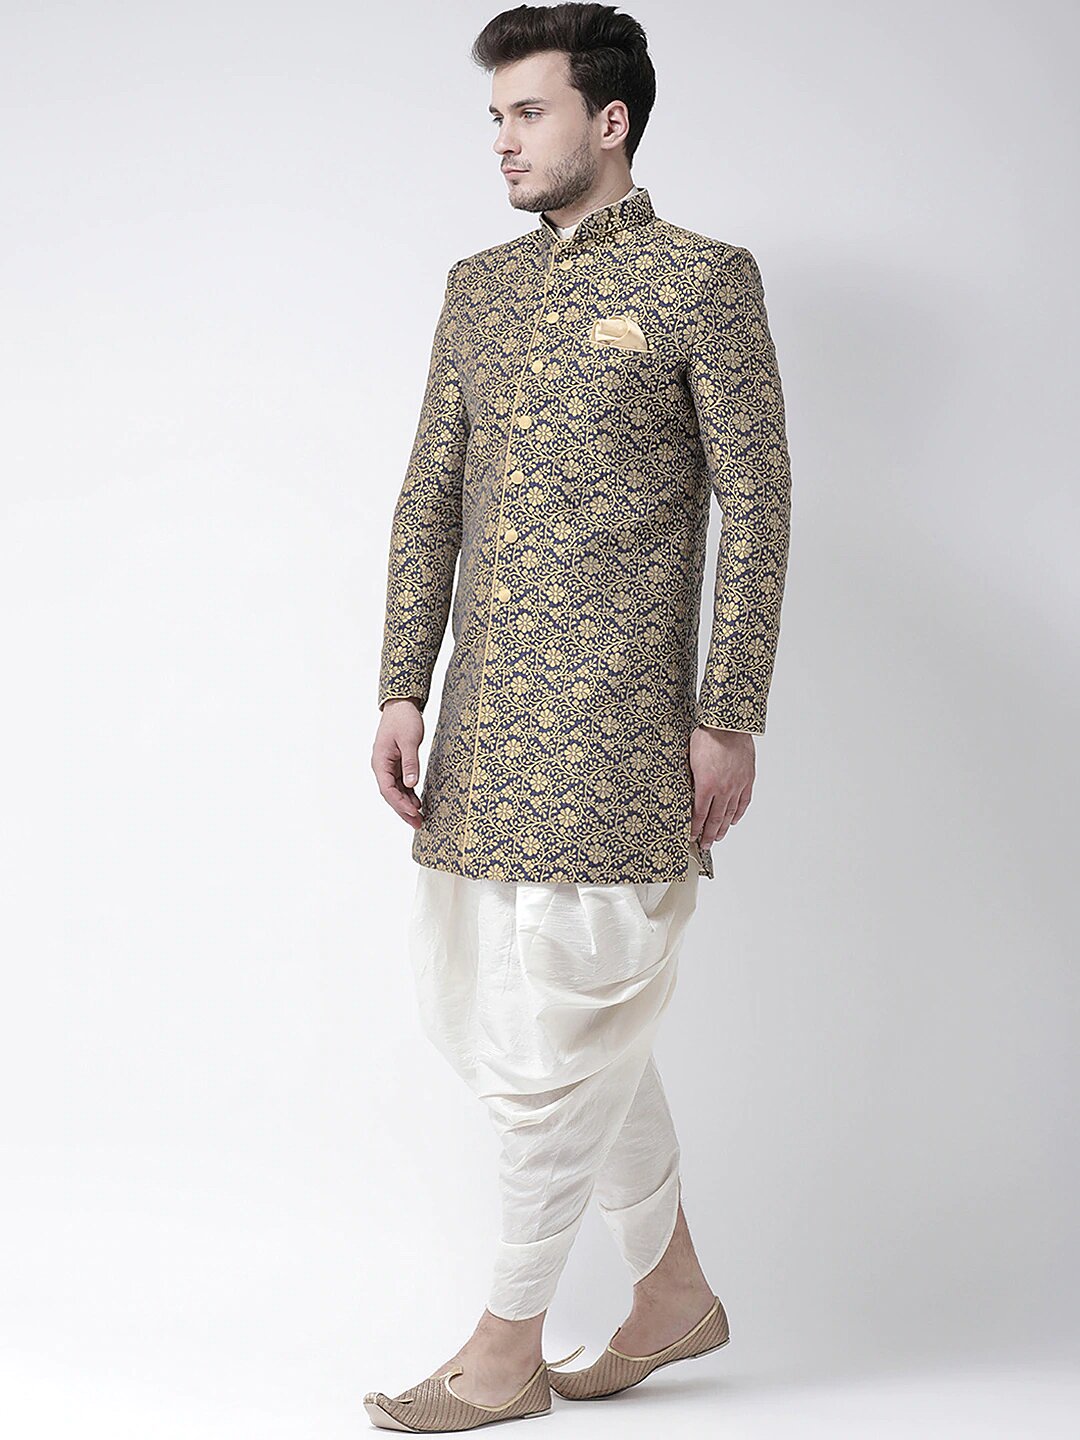 Navy Floral Woven Sherwani Indian Clothing in Denver, CO, Aurora, CO, Boulder, CO, Fort Collins, CO, Colorado Springs, CO, Parker, CO, Highlands Ranch, CO, Cherry Creek, CO, Centennial, CO, and Longmont, CO. NATIONWIDE SHIPPING USA- India Fashion X